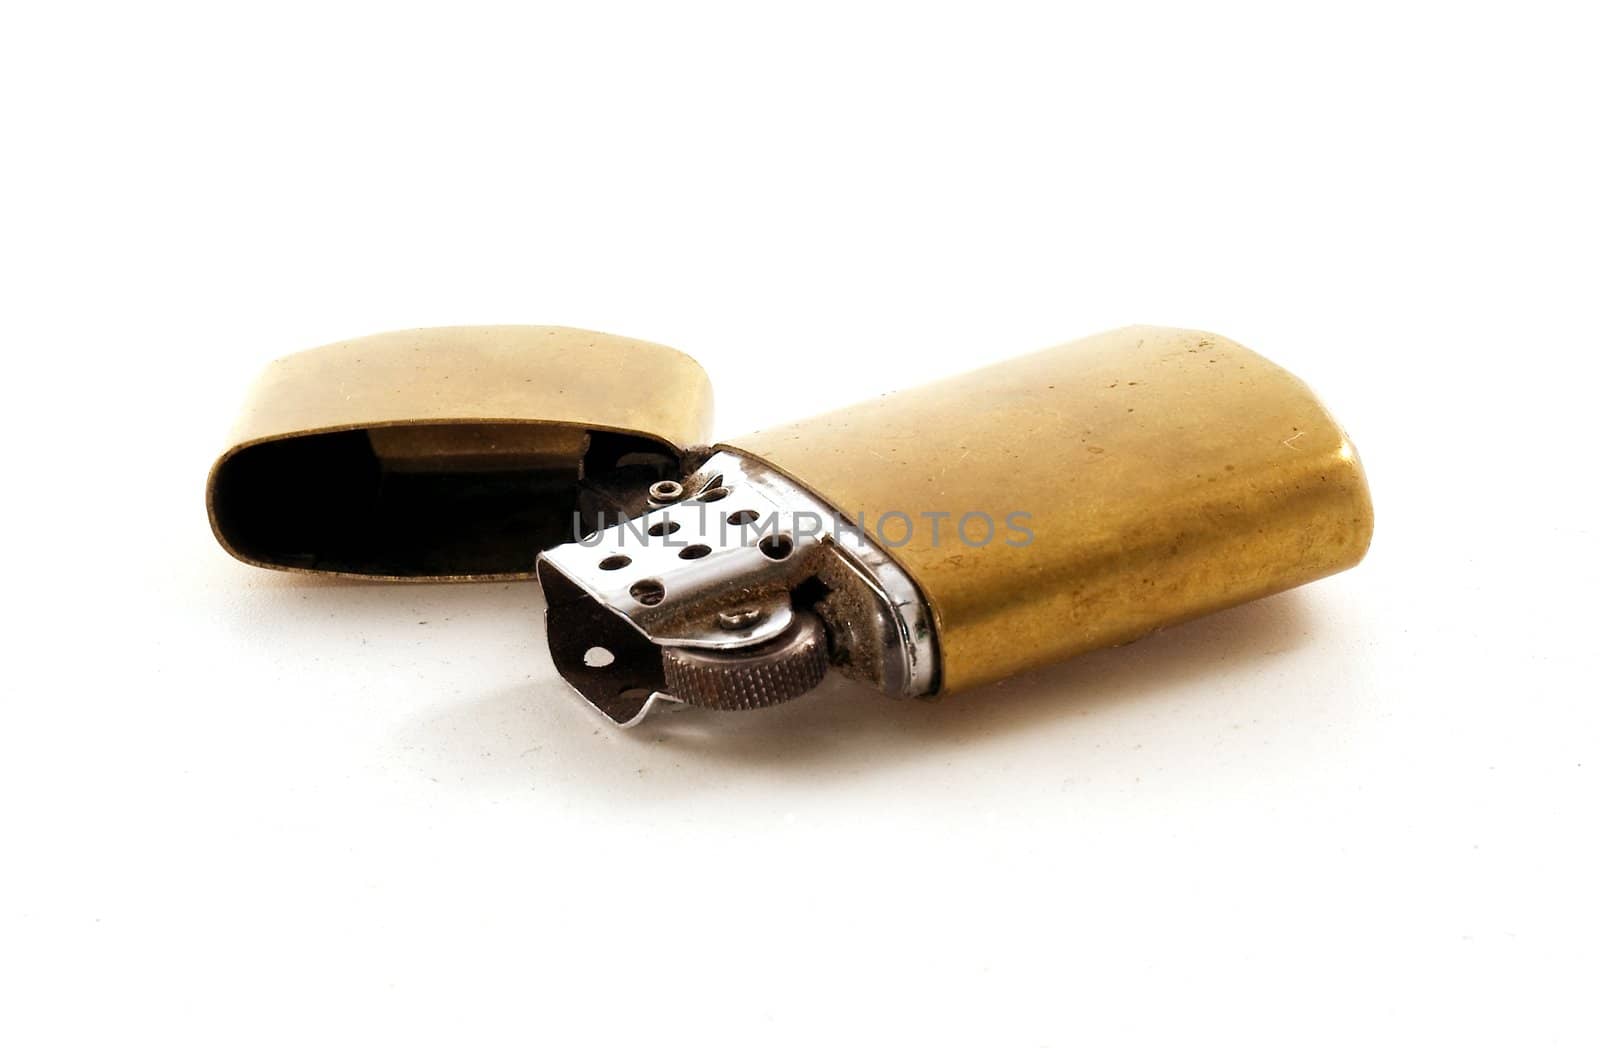 Old gasoline lighter on white background. Isolated object.